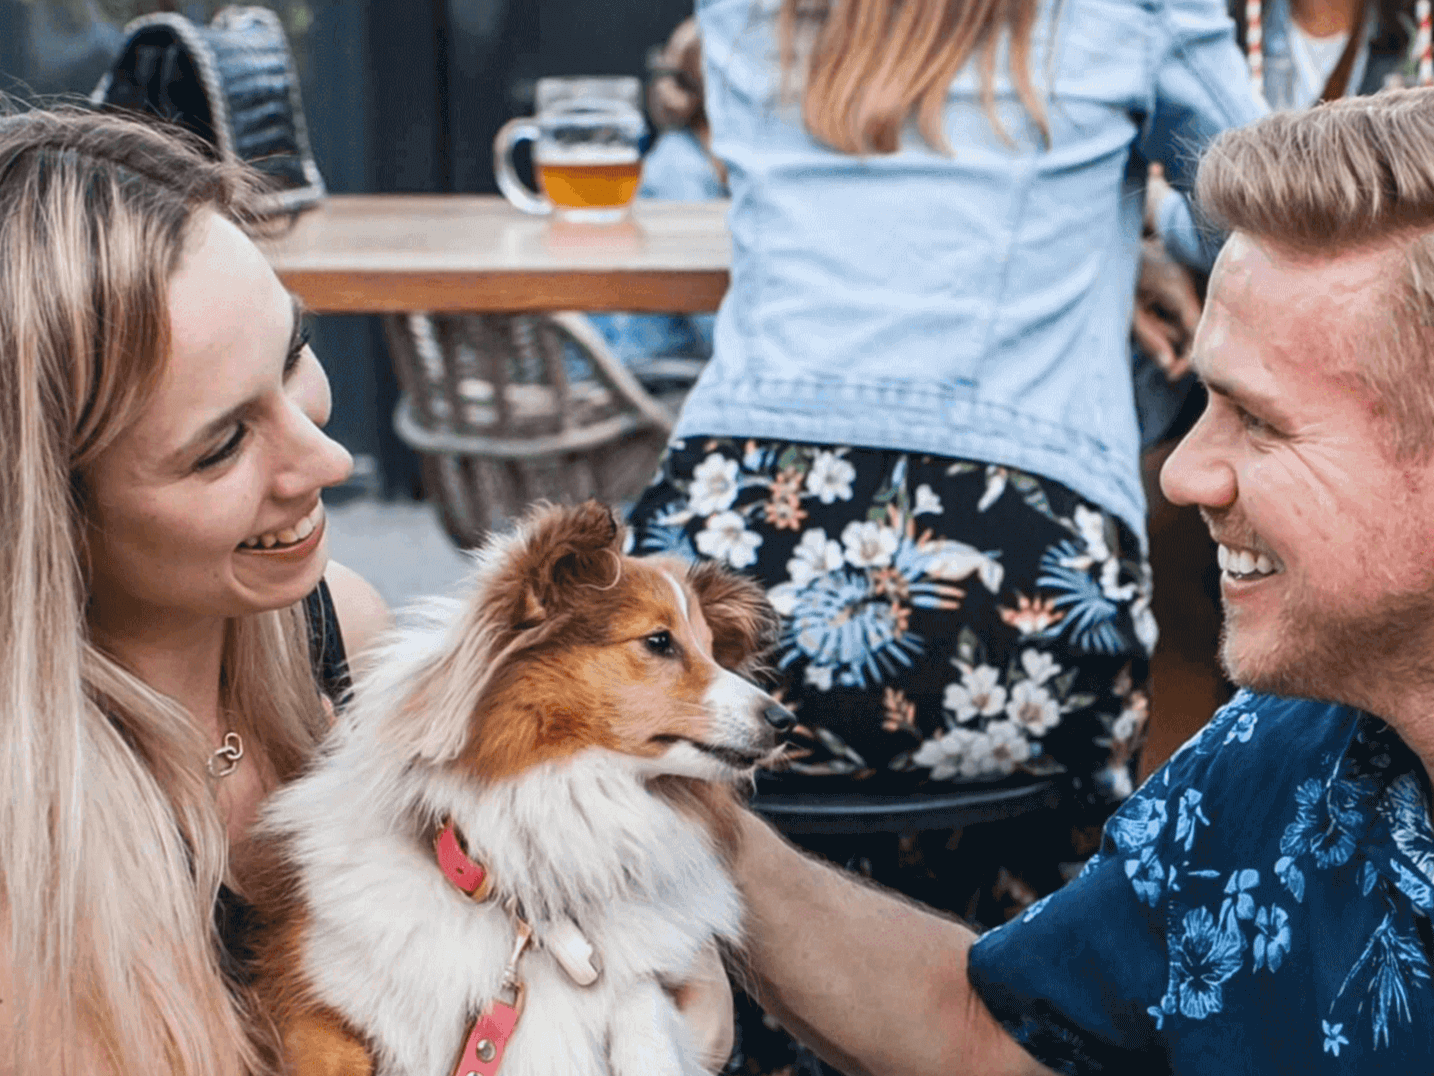 A couple with a dog at Manifesto market